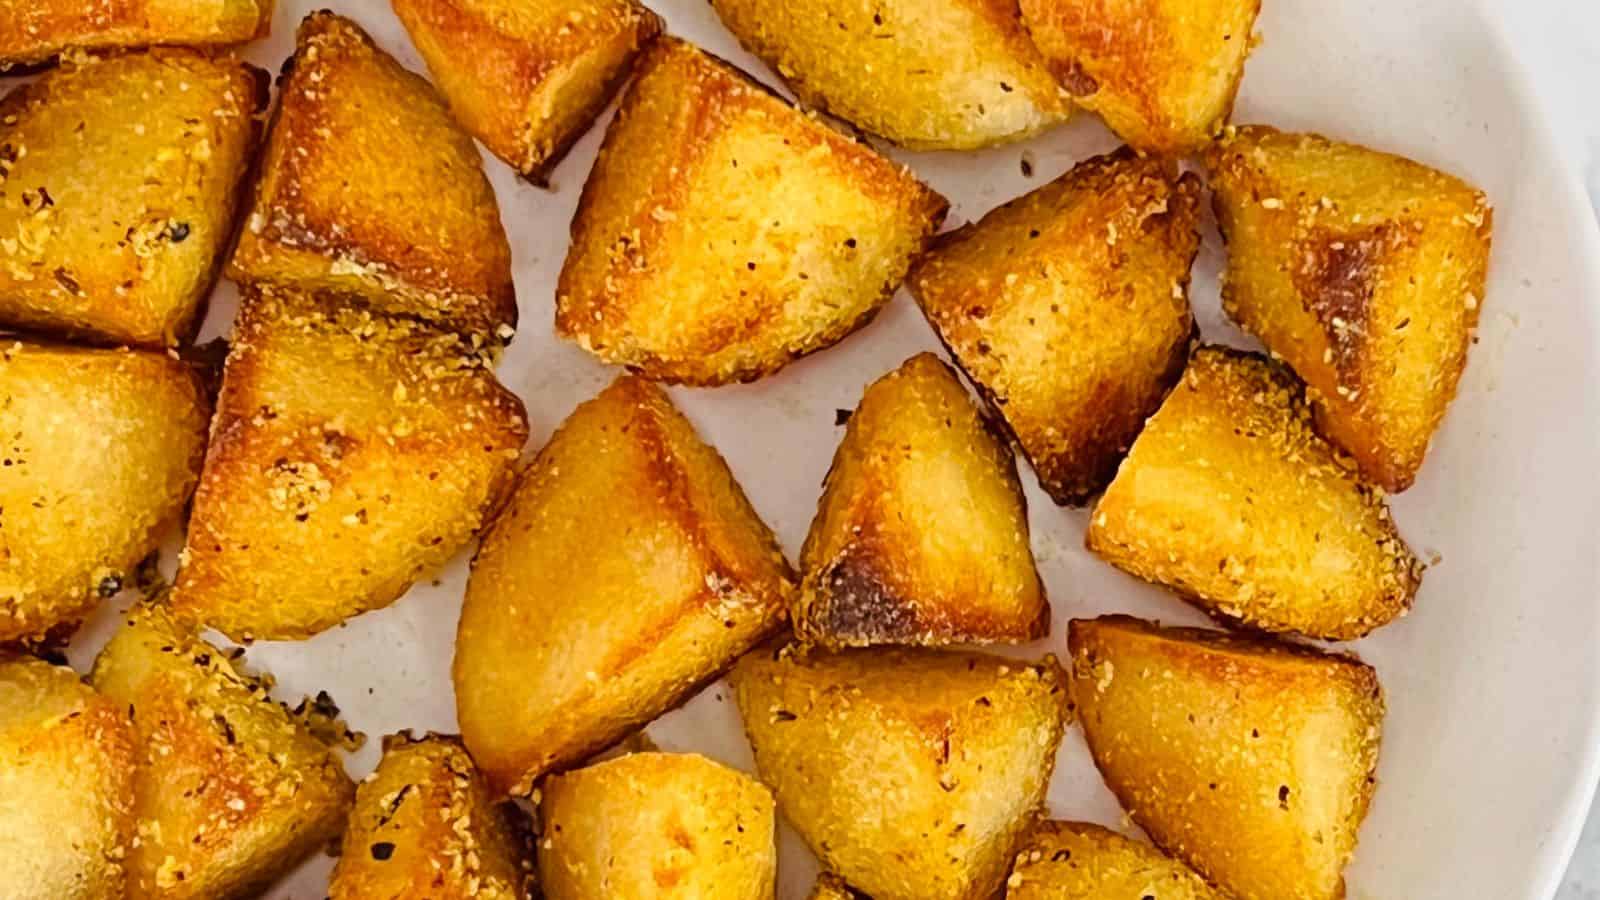 Close-up of roasted potato wedges seasoned with black pepper and spices on a white plate.